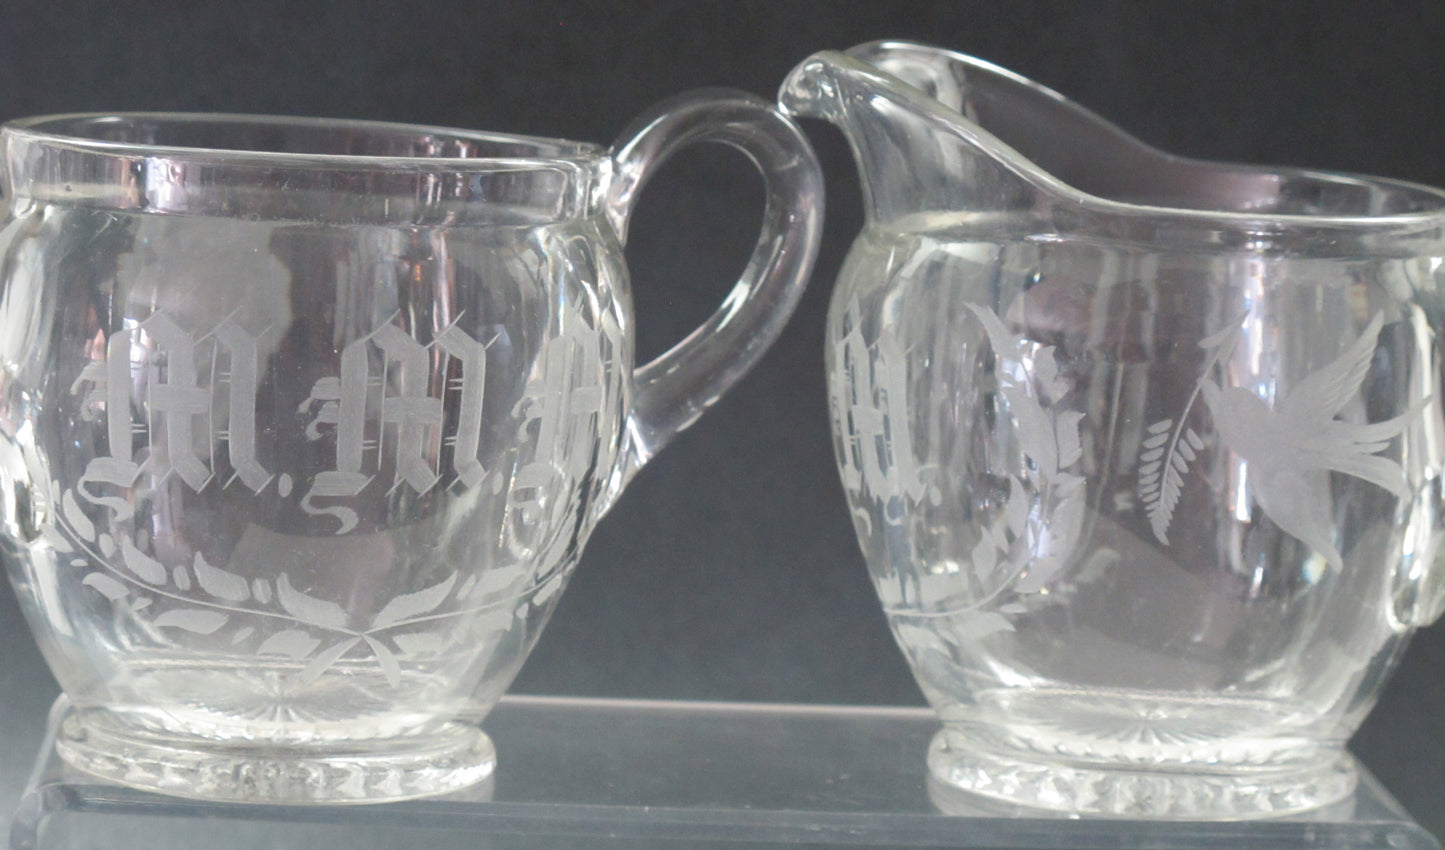 Cut Glass sugar and creamer, etched with initials MMM and bird - O'Rourke crystal awards & gifts abp cut glass